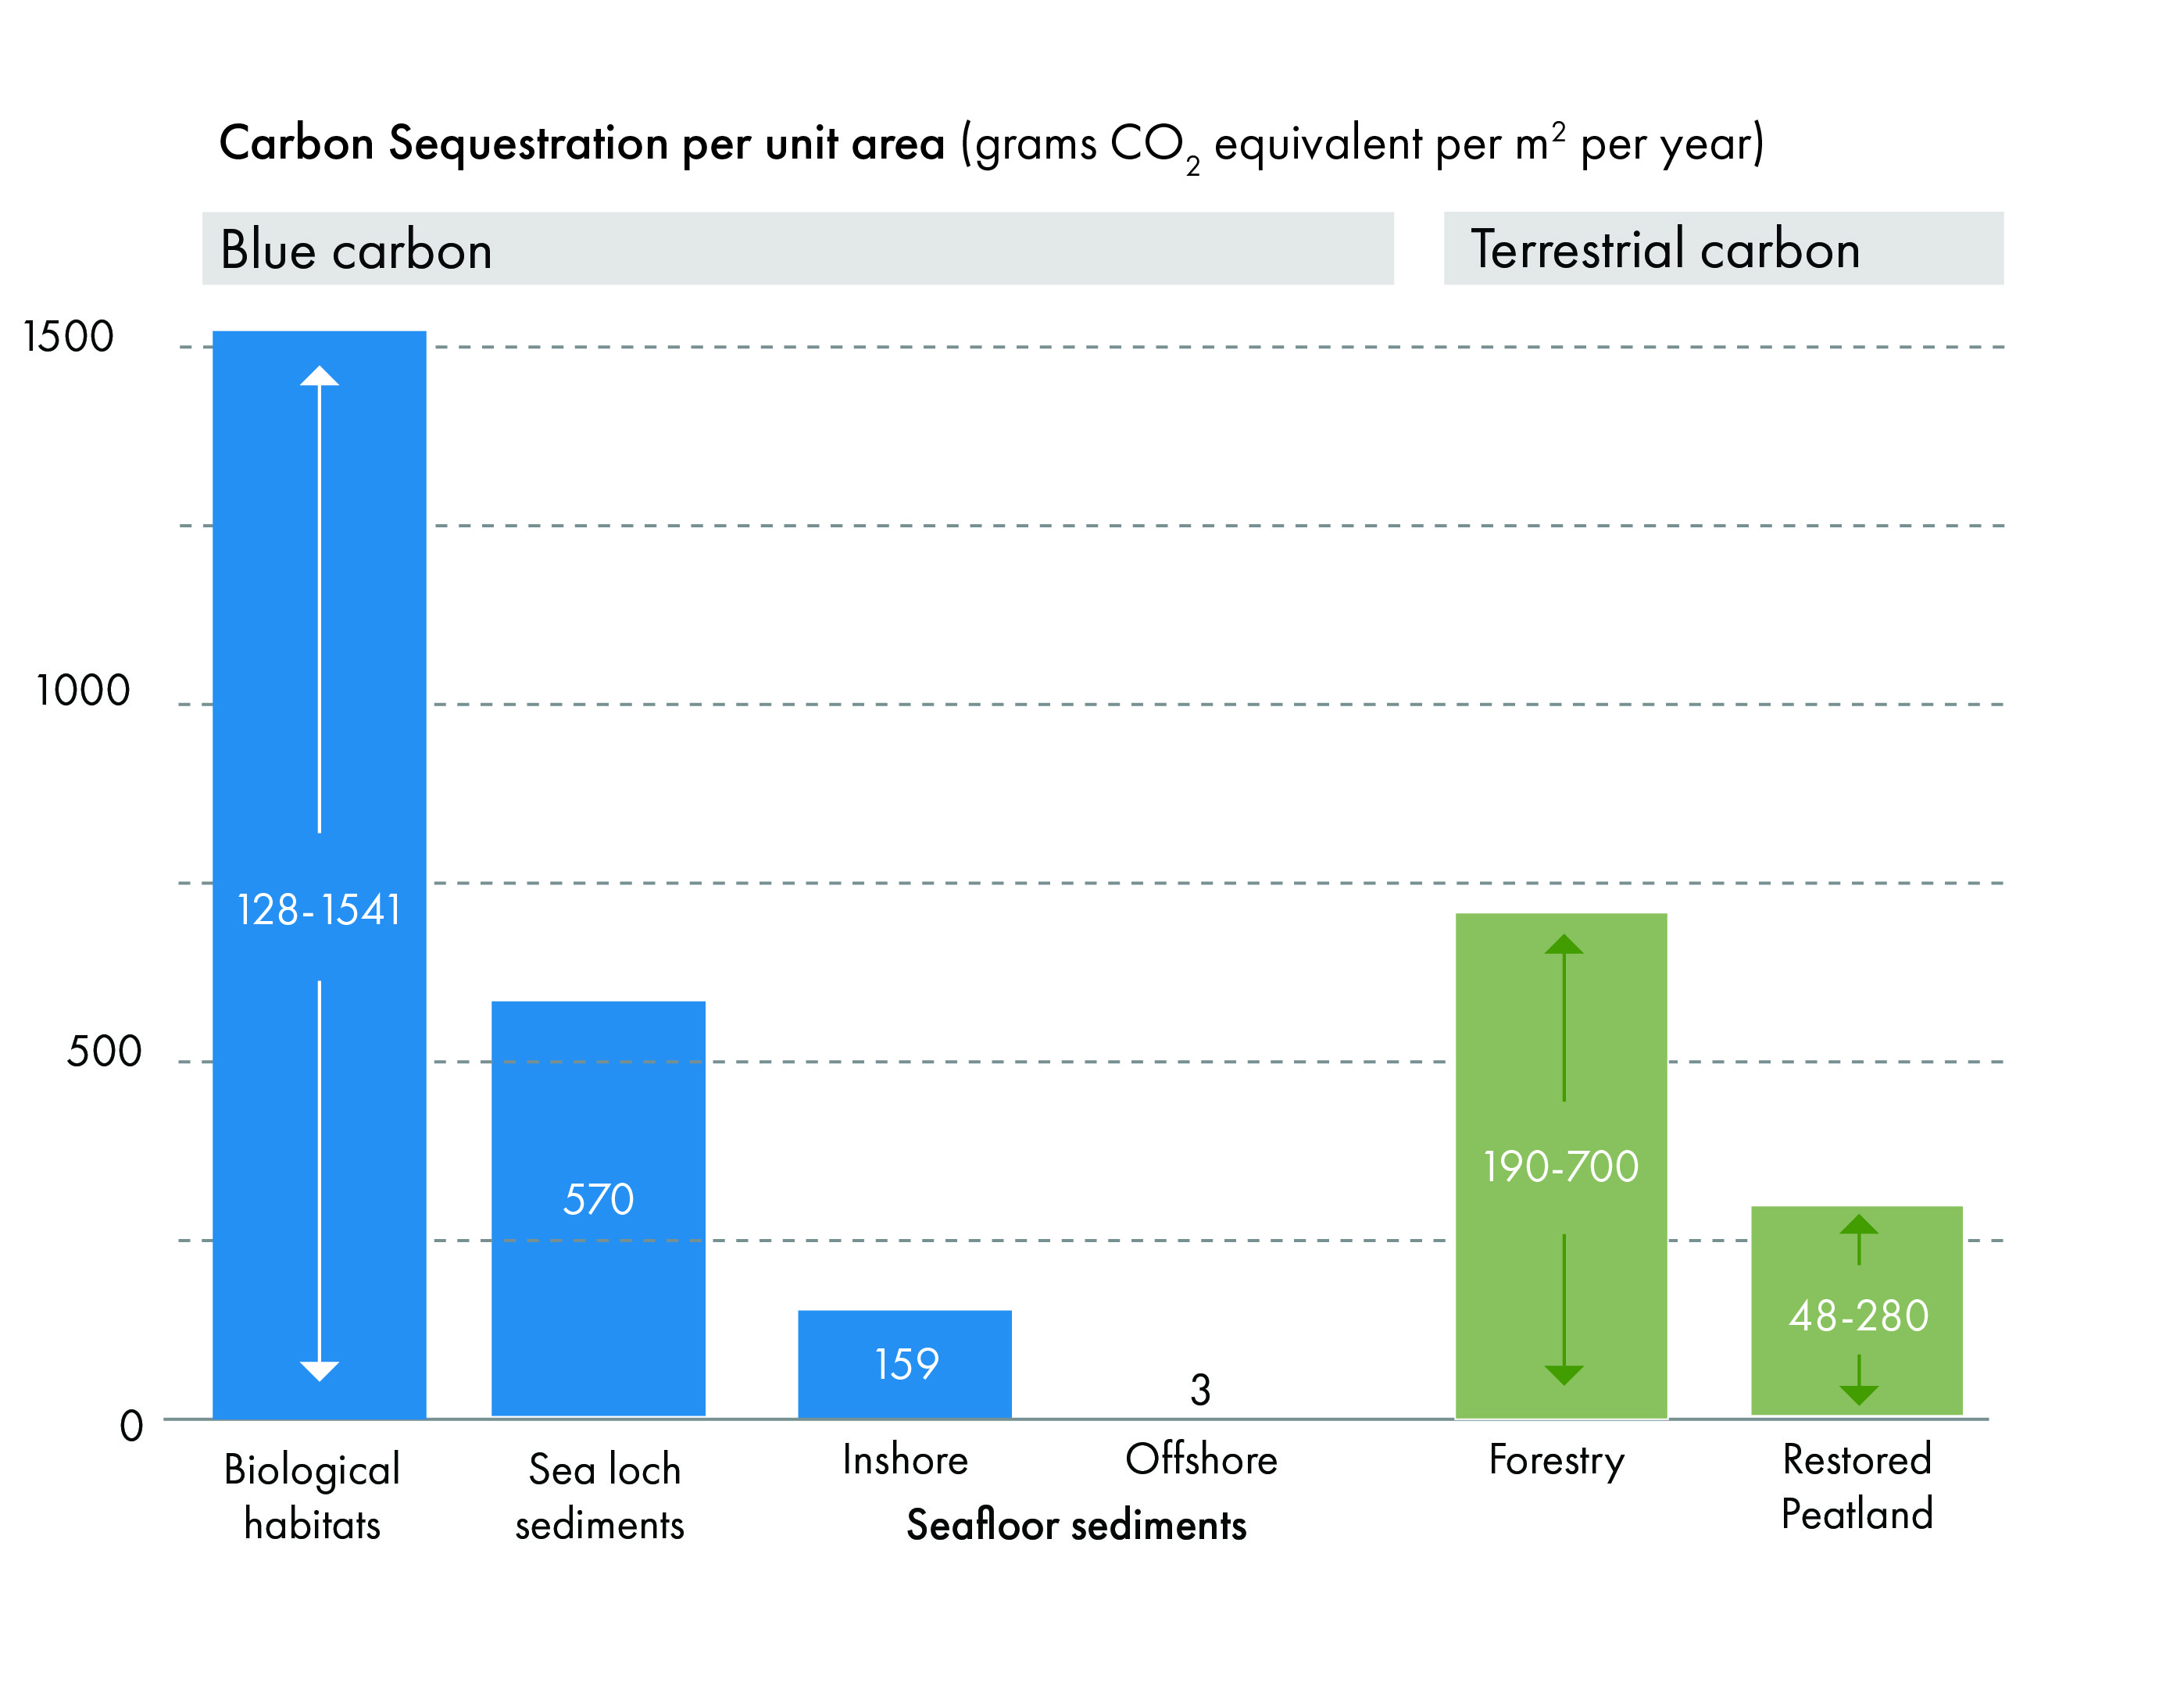 Bar graph showing the range of carbon sequestration rates (on a per unit basis, measured in grams of carbon dioxide equivalent per meter square per year) in blue carbon biological habitats, sea loch sediments, seafloor sediments (inshore and offshore), forestry and restored peatland.